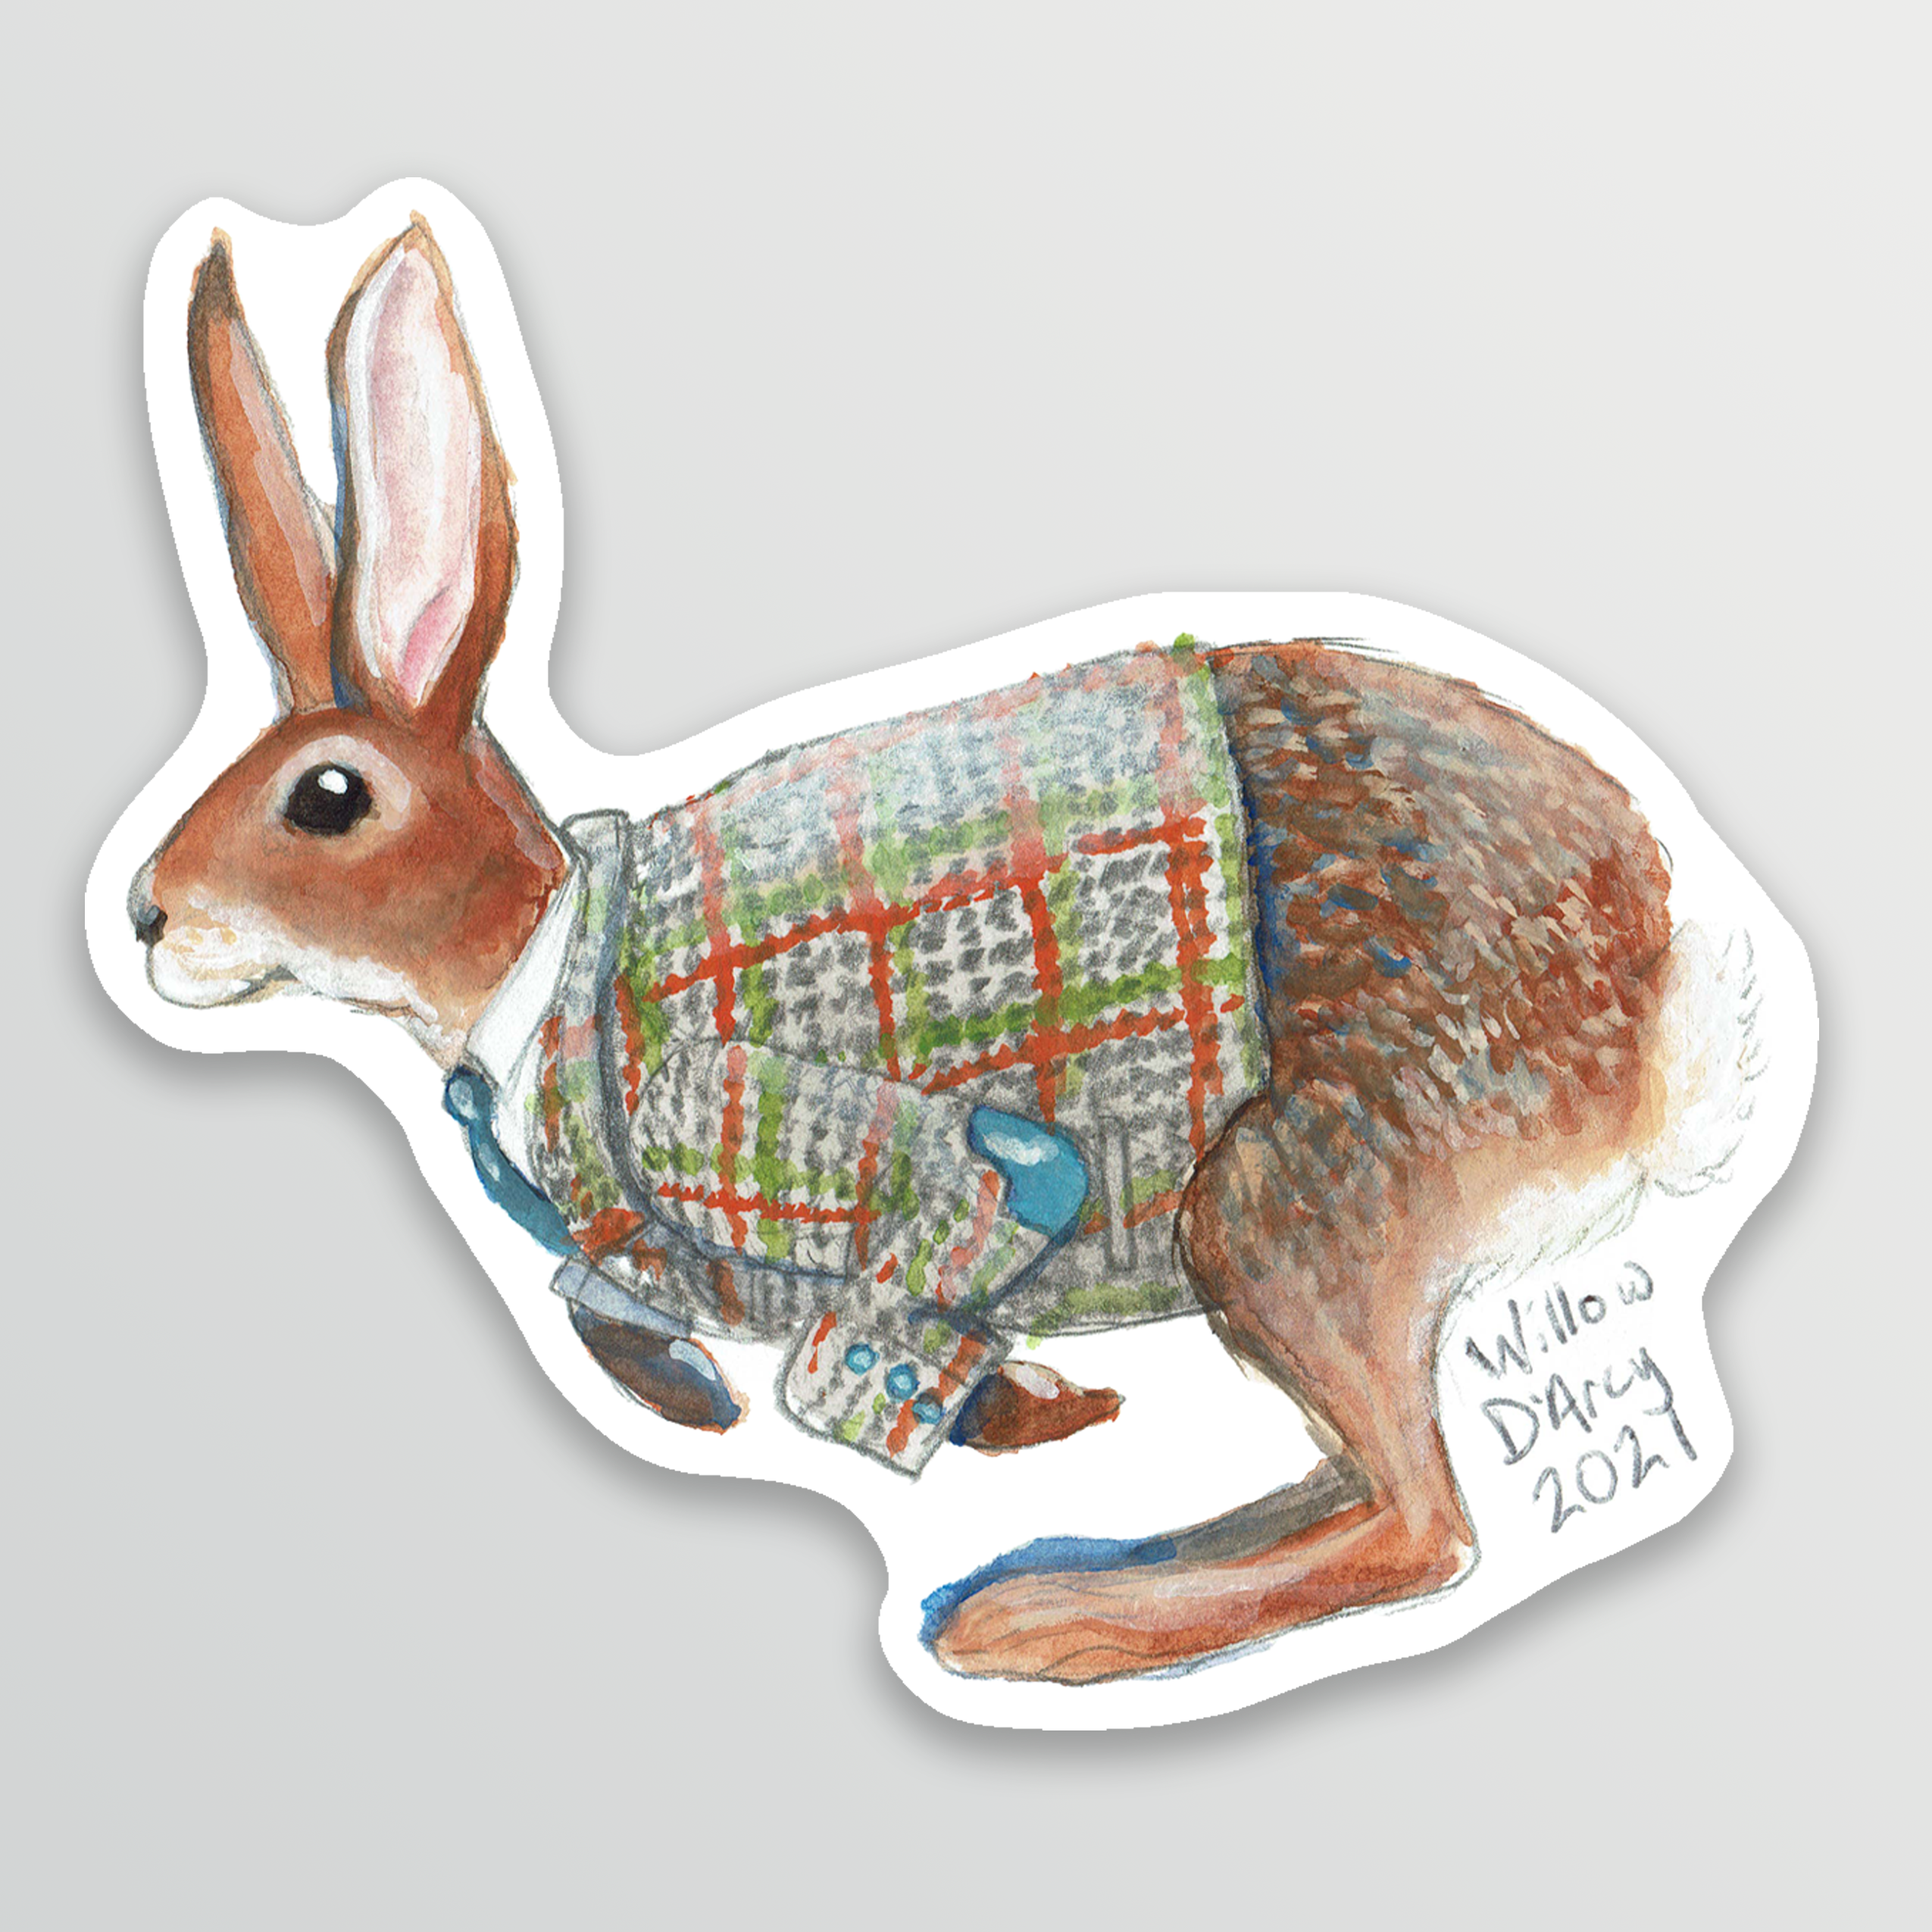 Sticker of an illustration of a hare wearing a tweed jacket.